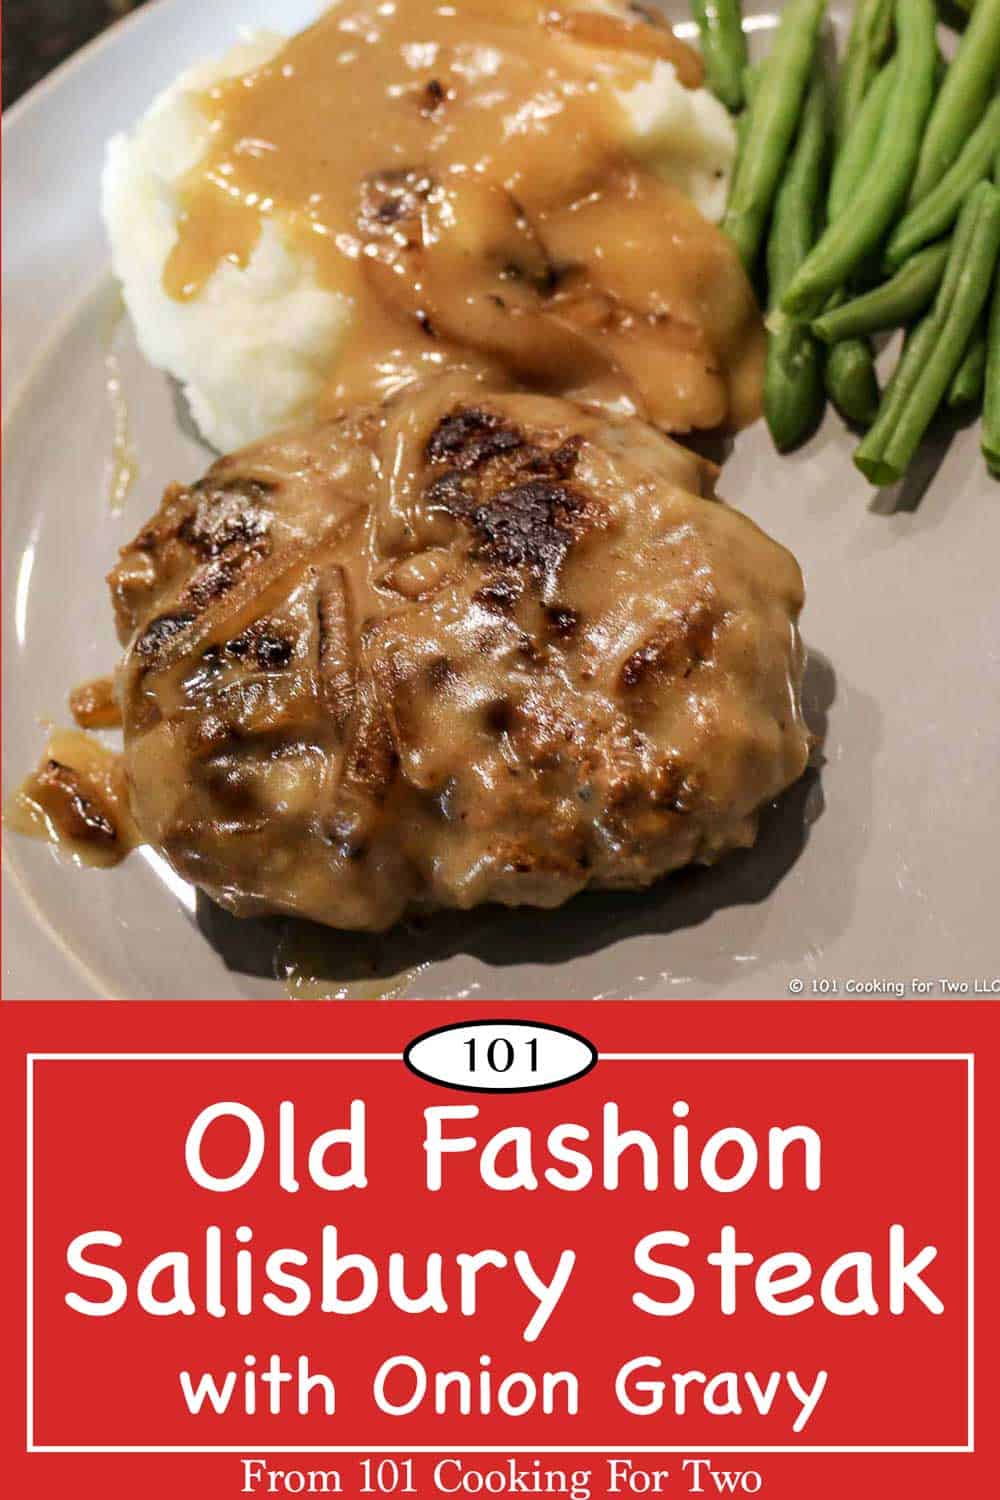 Old Fashion Salisbury Steak with Onion Gravy | 101 Cooking For Two